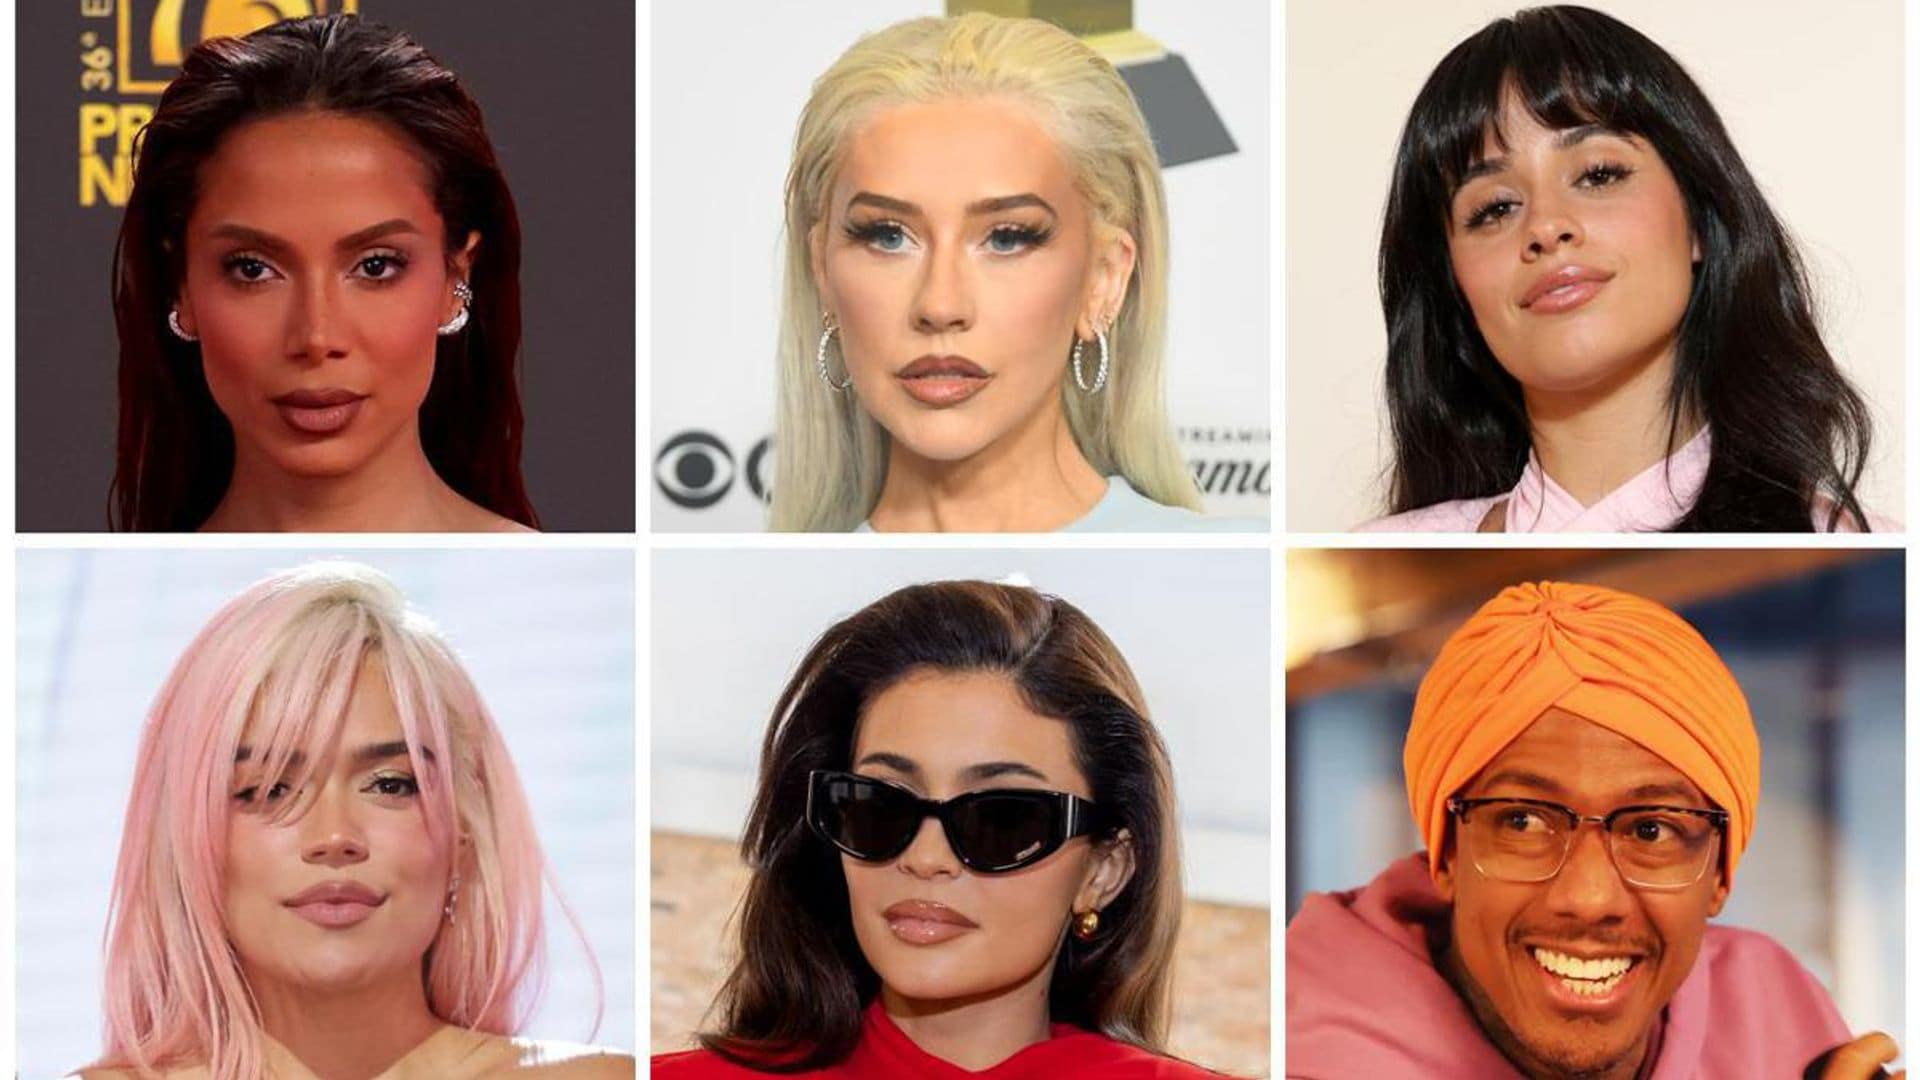 Watch the 10 Best Celebrity TikToks of the Week: Christina Aguilera, Kylie Jenner, Karol G, and more